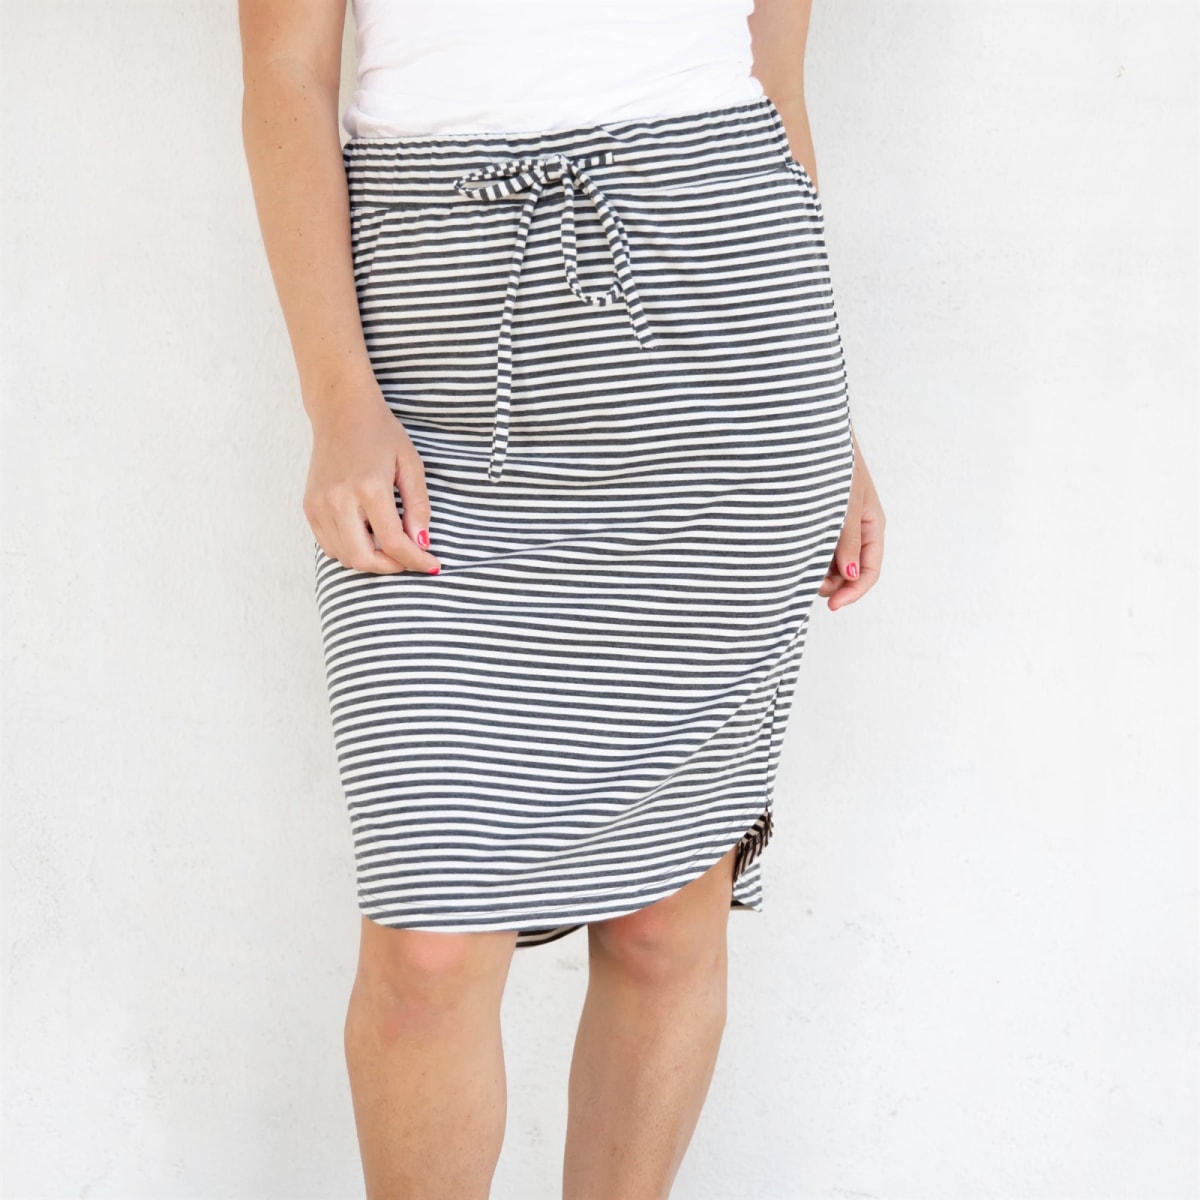 The Mabel Weekend Skirt – Only $12.99!